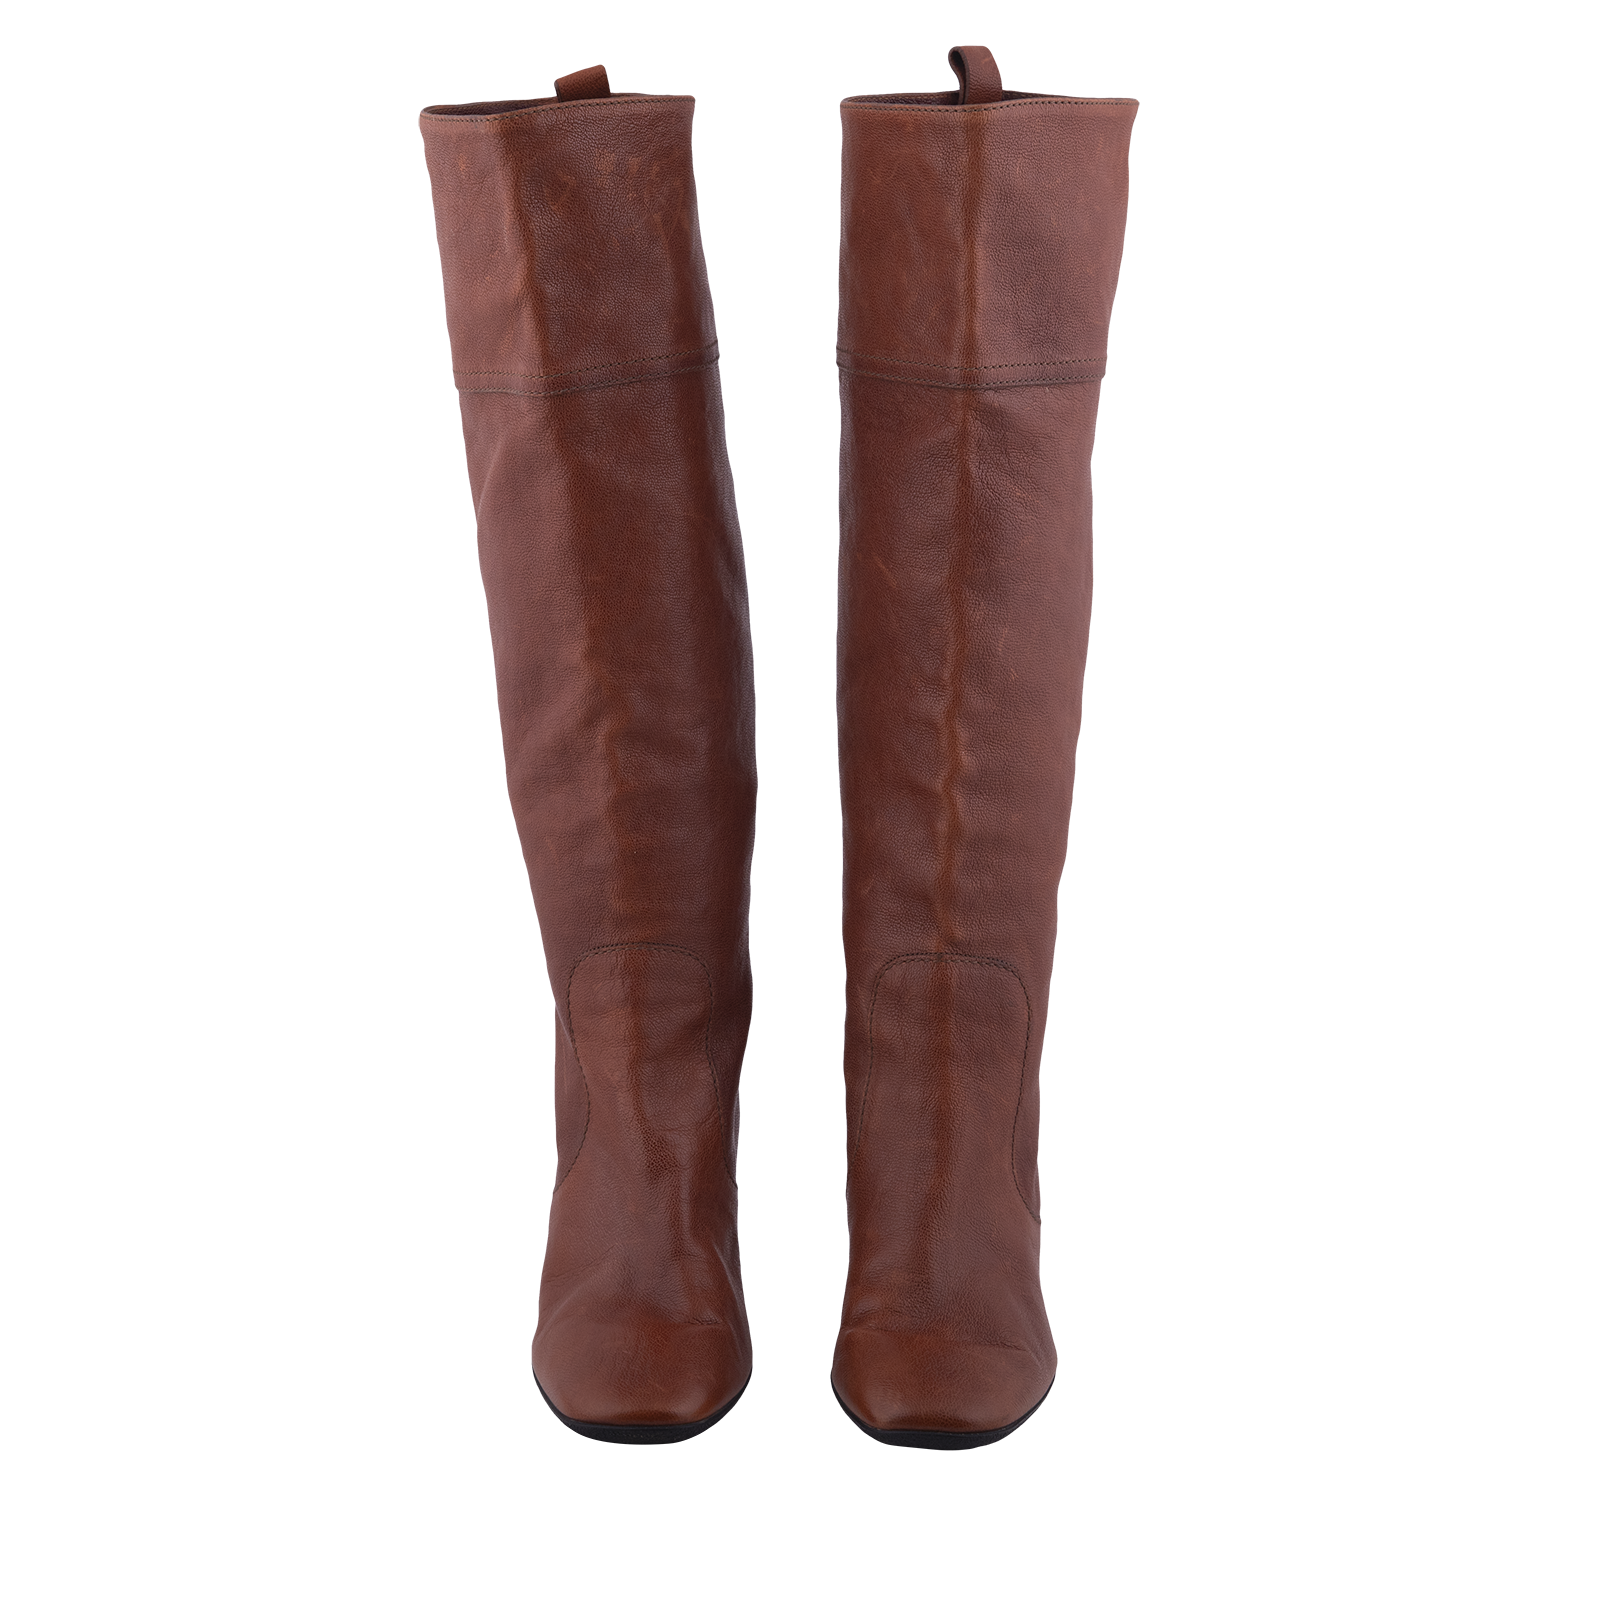 Pepper's Luxury Closet - Brown Leather Knee-high Boots